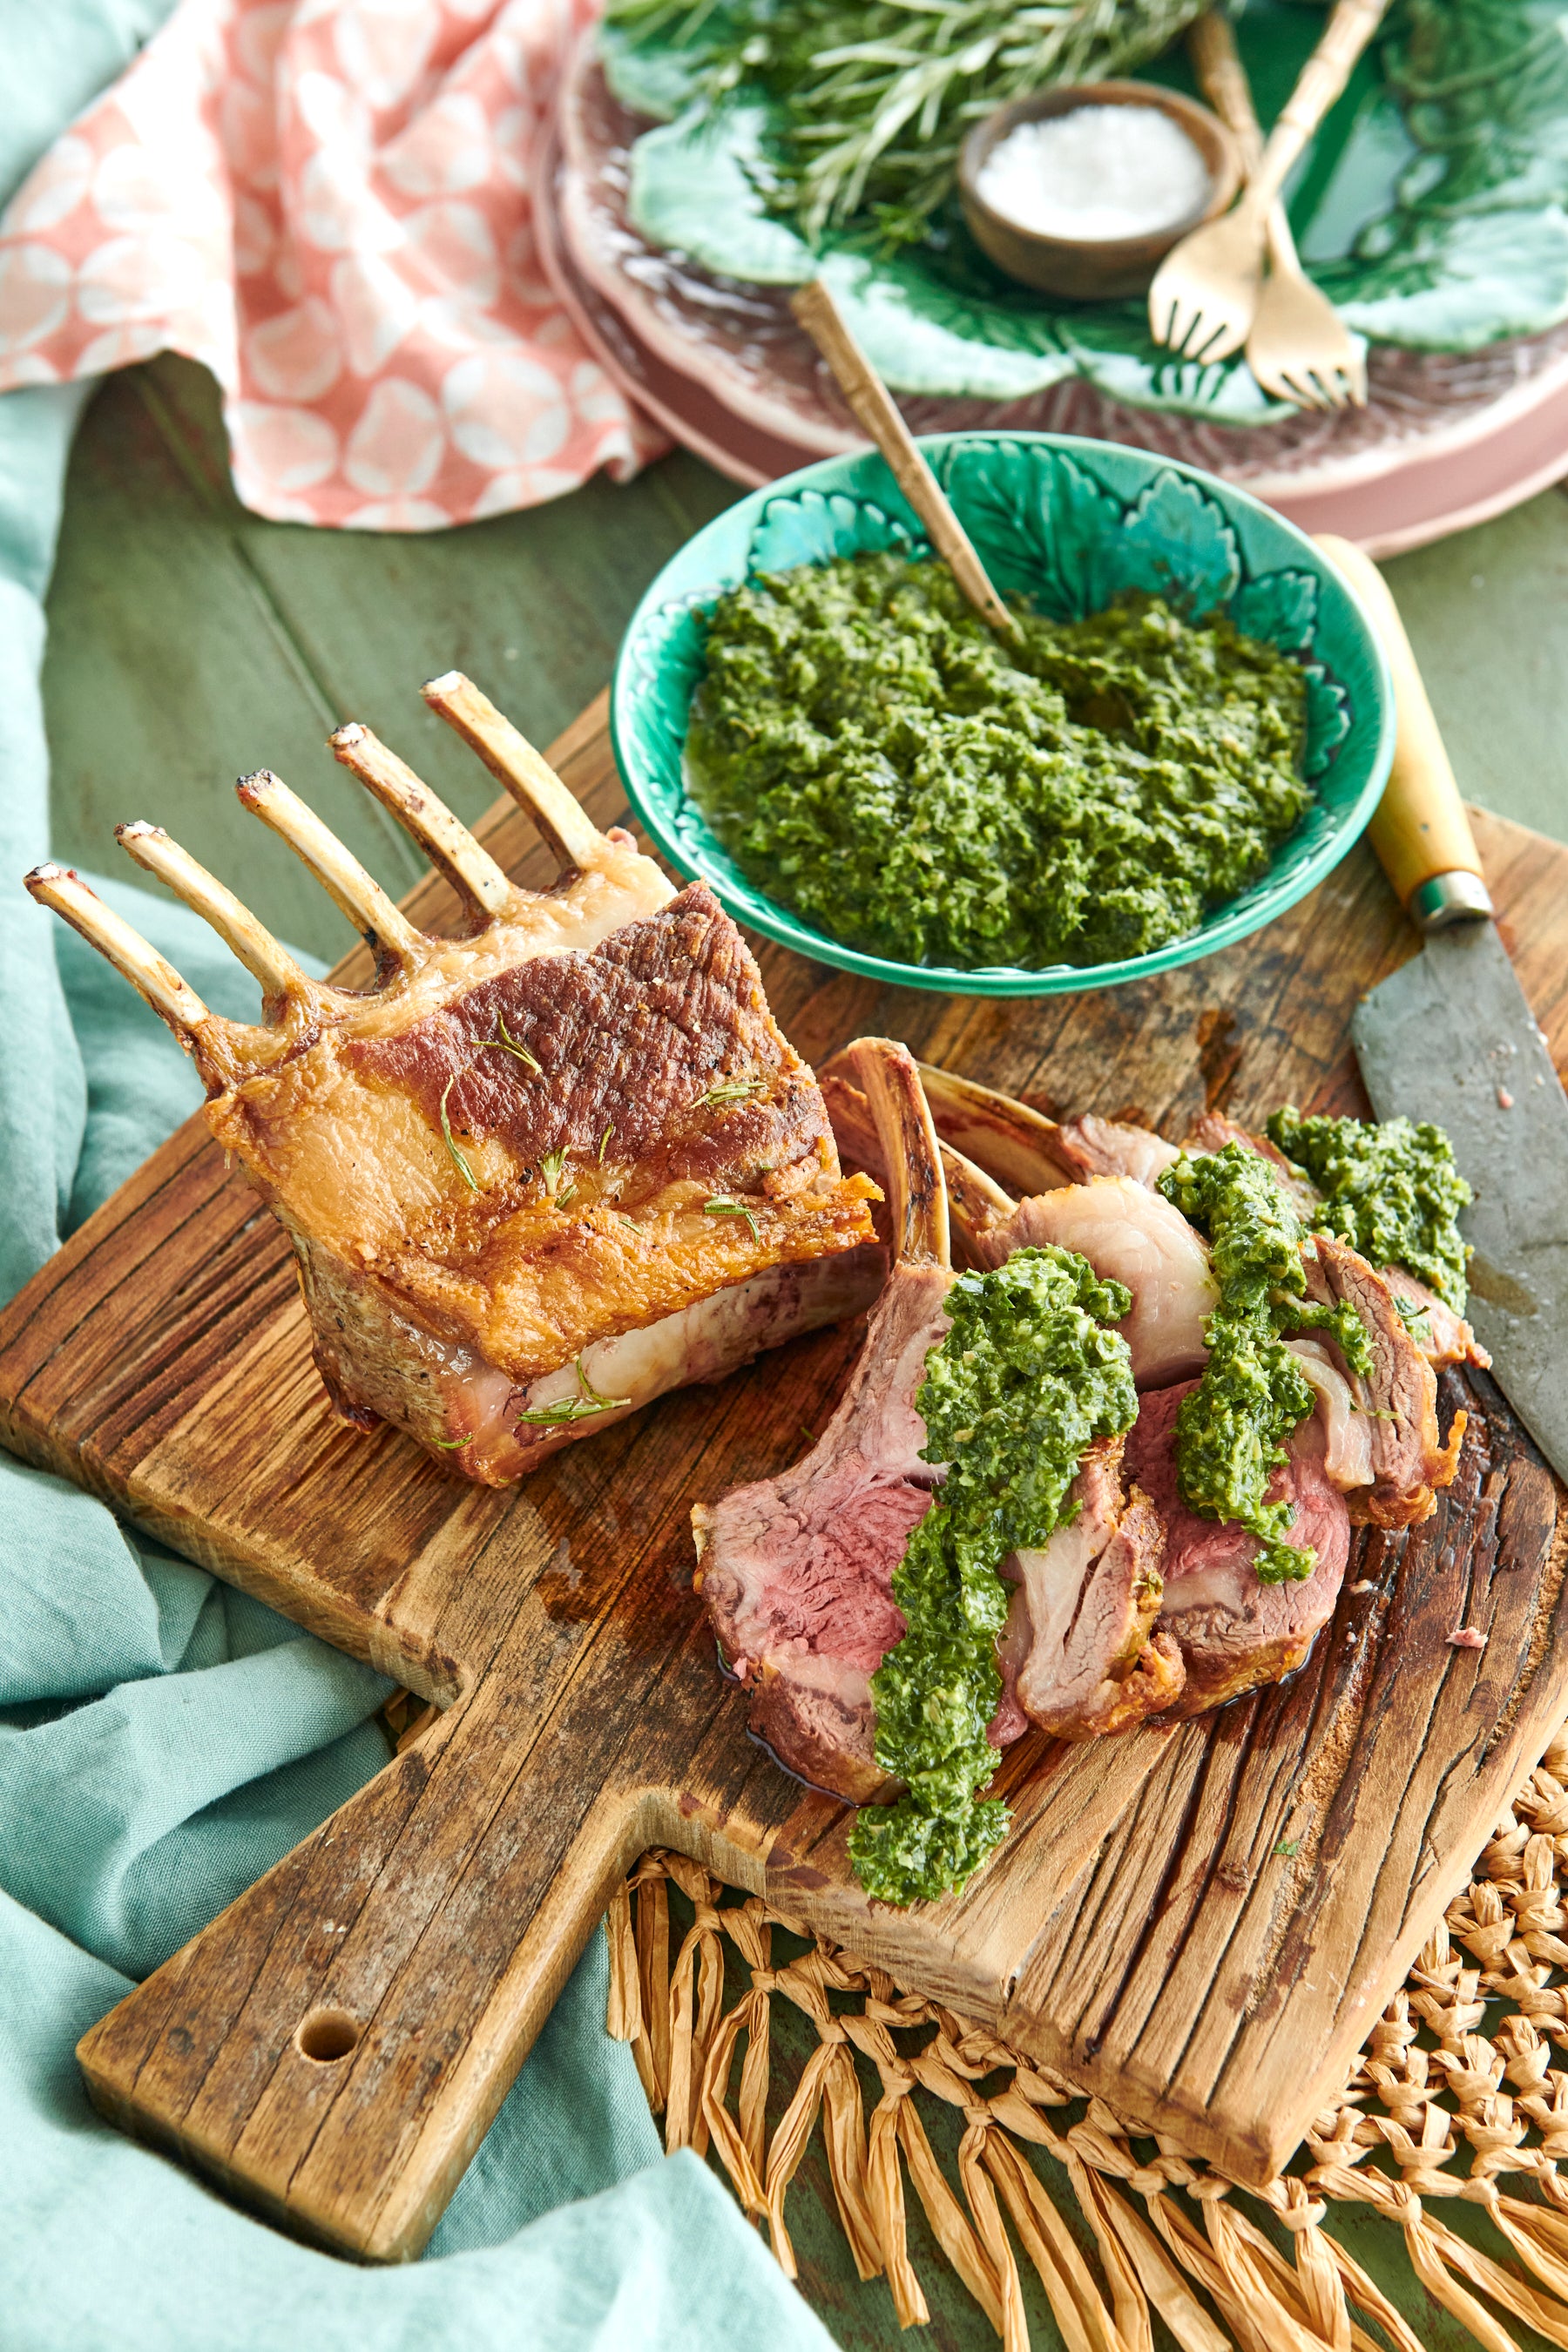 Blue bowl at top right that contains salsa verde.  Cooked rack of lamb underneath with some lamb cutlets on a wooden chopping board and covered with salsa verde.